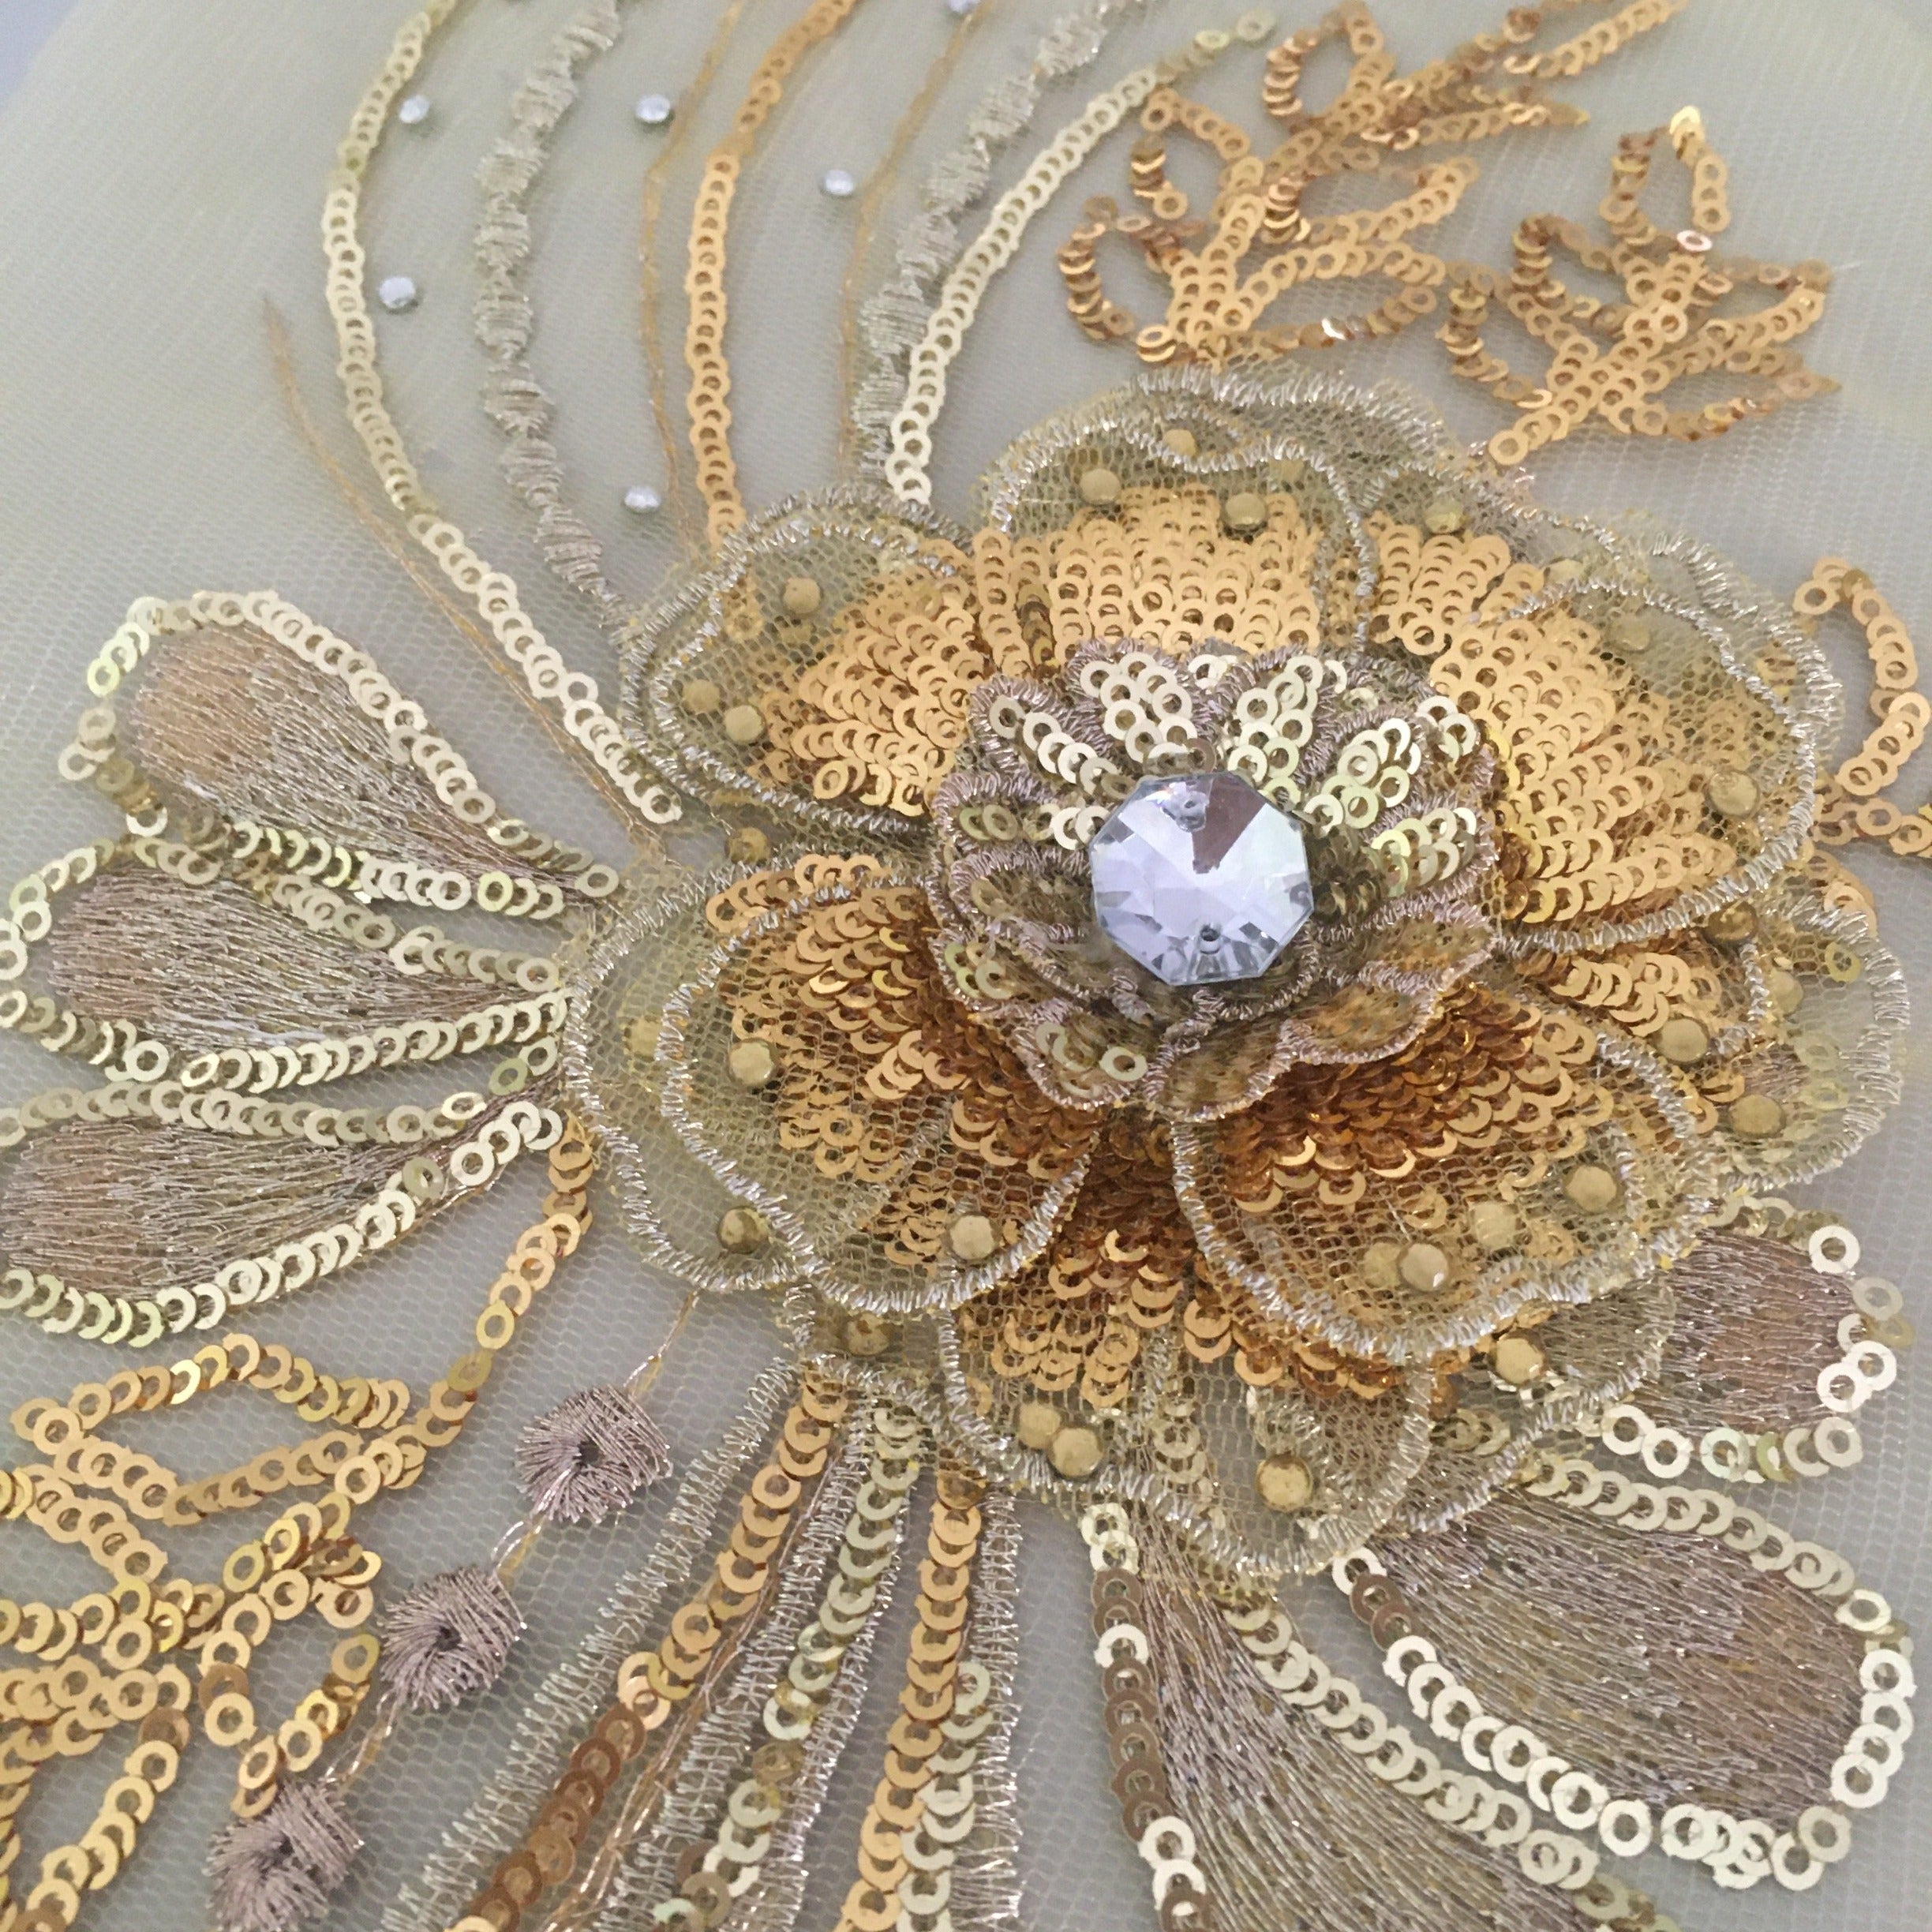 A mixture of bright and light gold metallic sequins and threads  are used in this 3d flower applique which would make a stunning addition to a dance or belly dance costume  Hotfix gems and crystals are scattered through the design.   